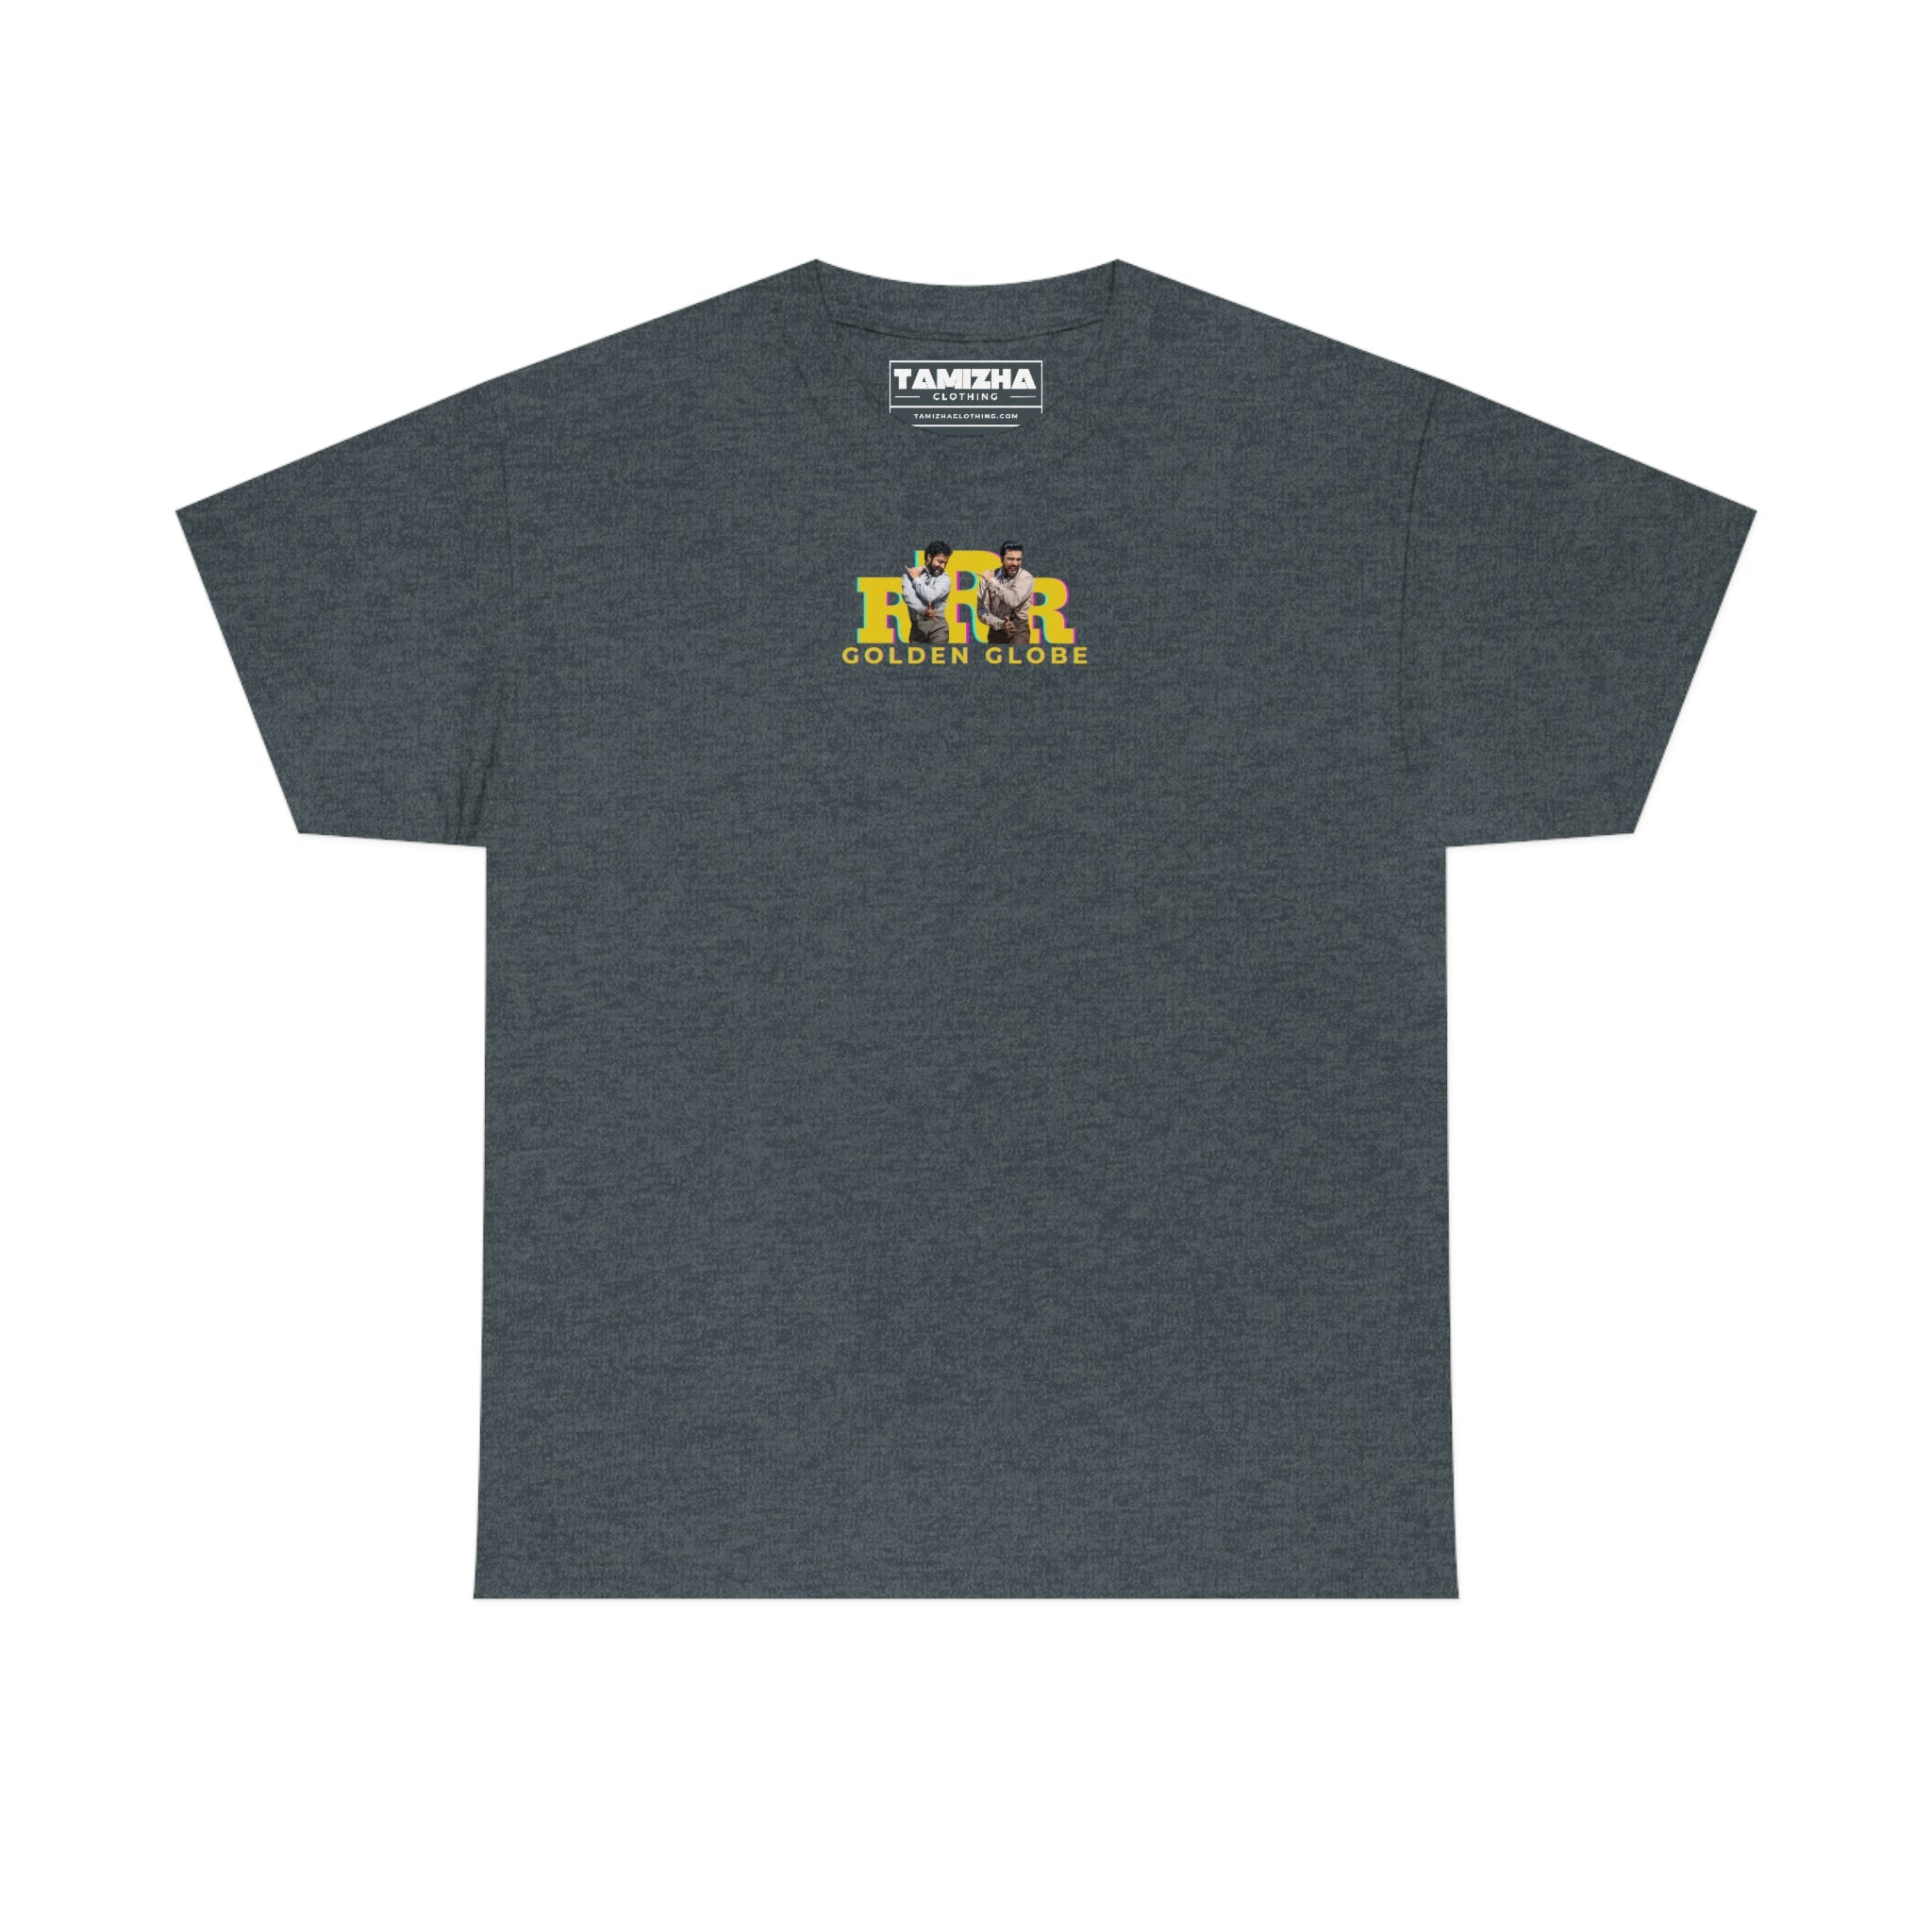 RRR Golden Globe Commemoration T-shirt with front and back